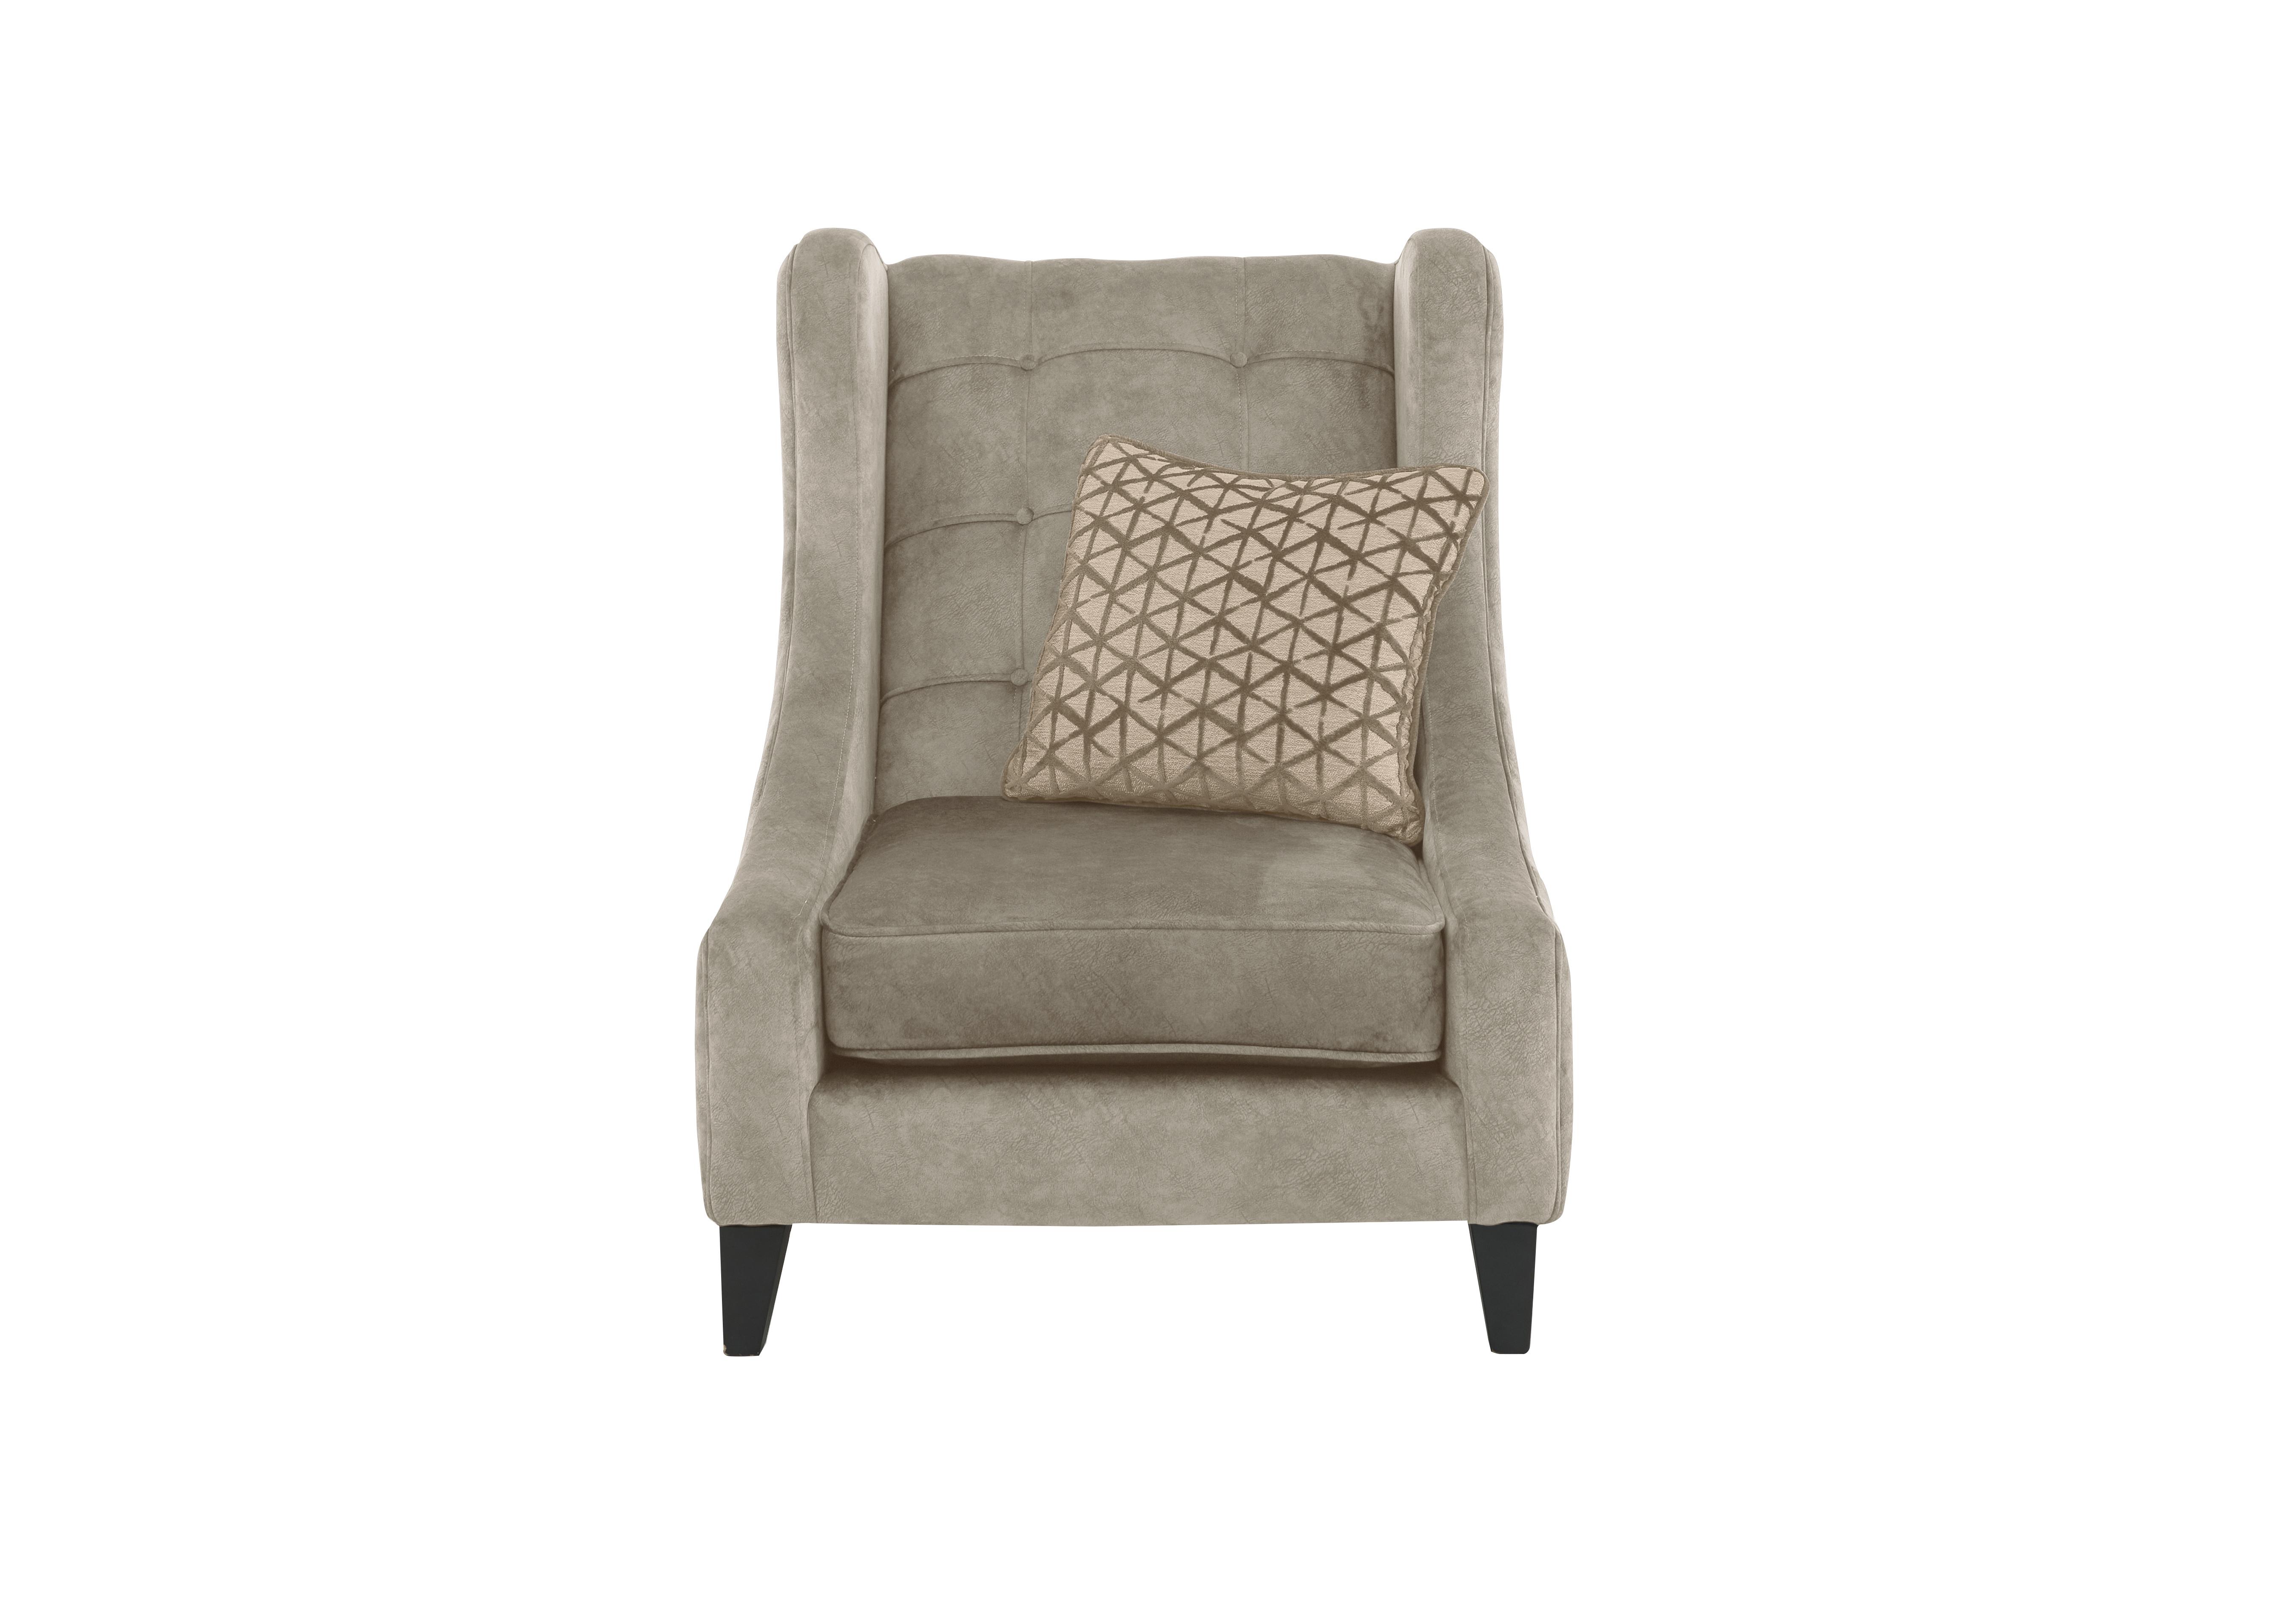 Ariana Fabric Accent Armchair in Dapple Oyster Chrome Insert on Furniture Village